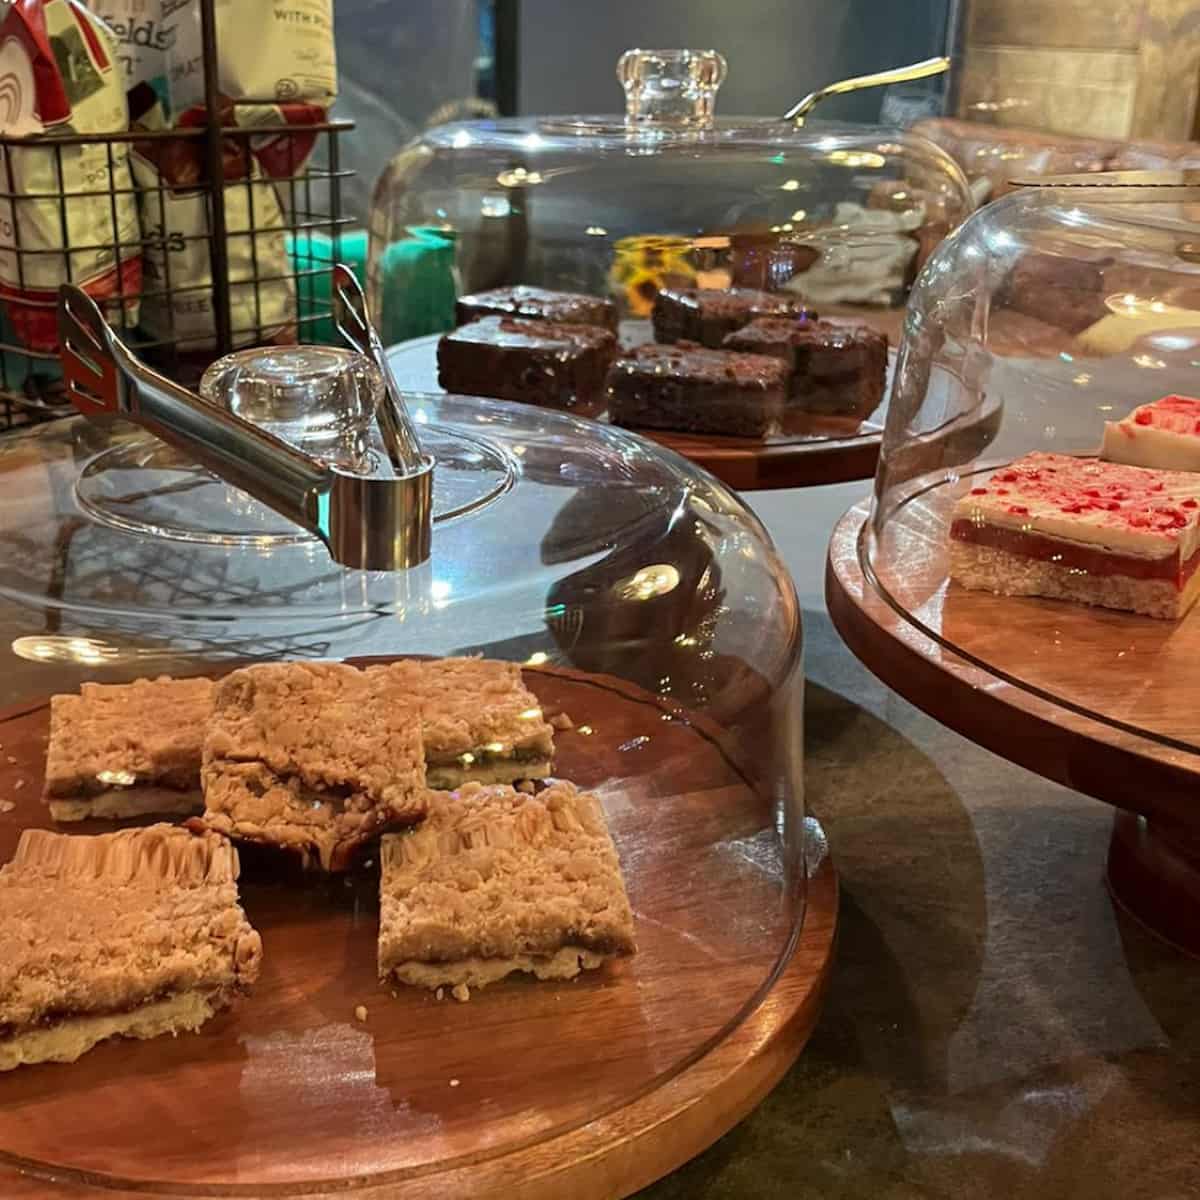 Slices of cake, flapjack and shortbread on wooden platters, covered with glass domes.